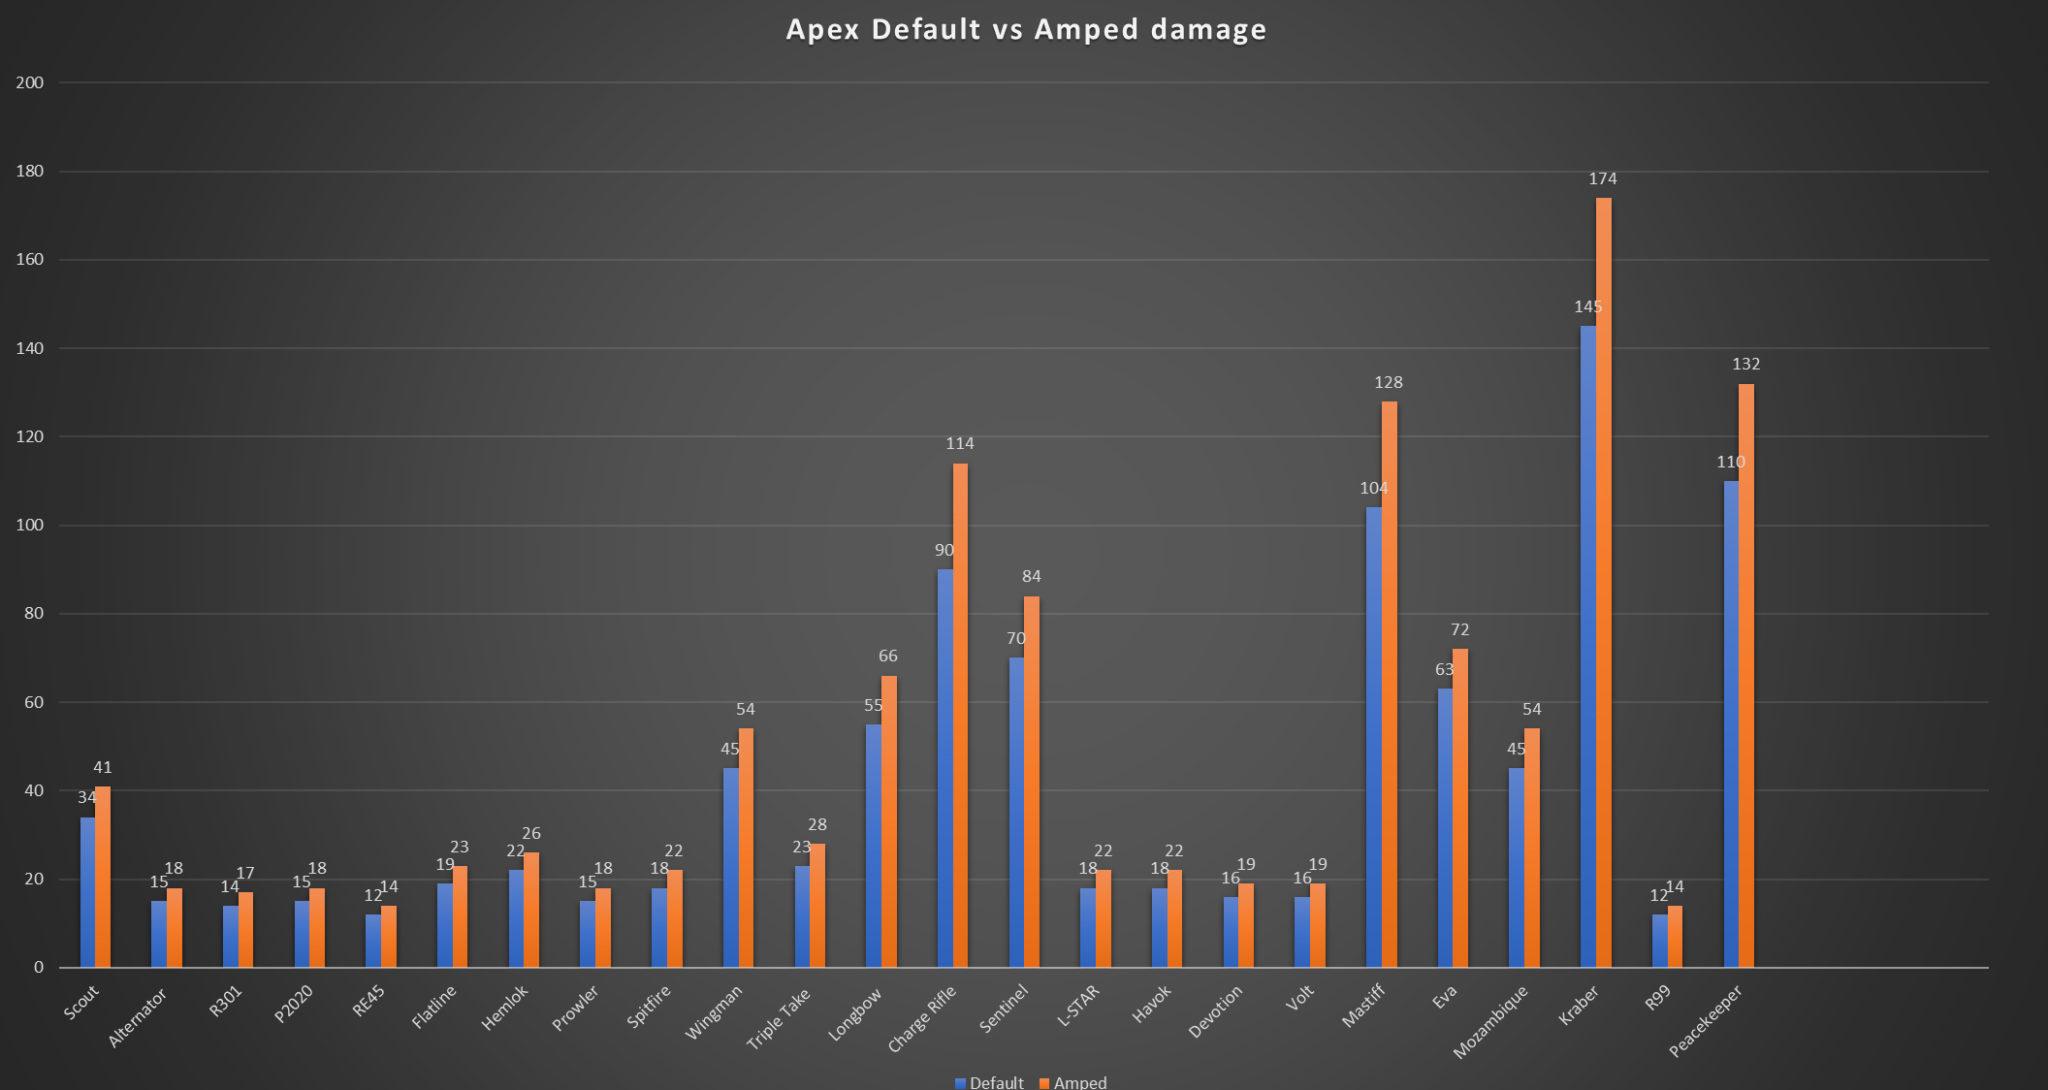 Rampart's wall damage in Apex Legends